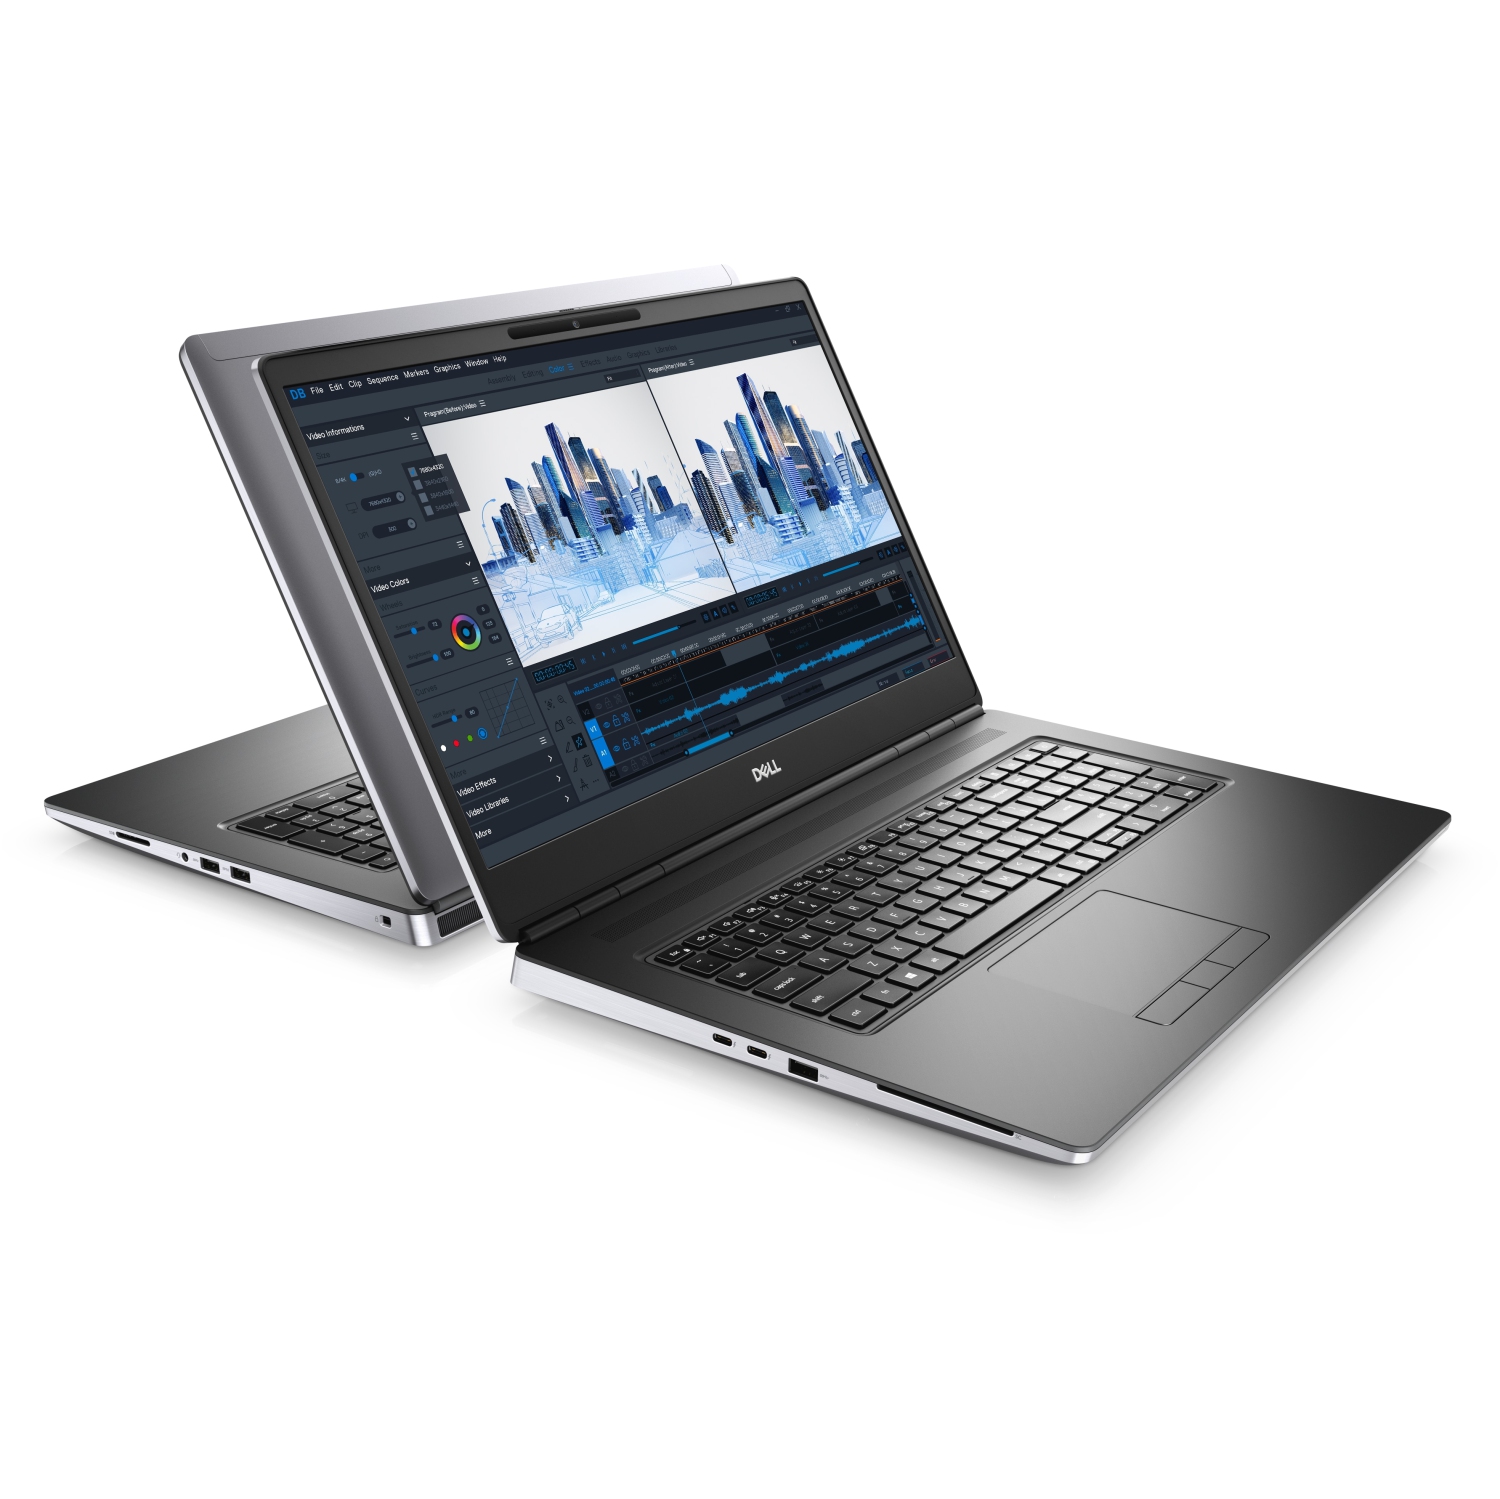 Refurbished (Excellent) - Dell Precision 7000 7760 Workstation Laptop (2021), 17.3" FHD, Core i9, 256GB SSD, 32GB RAM, RTX A4000, 5 GHz, 11th Gen CPU Certified